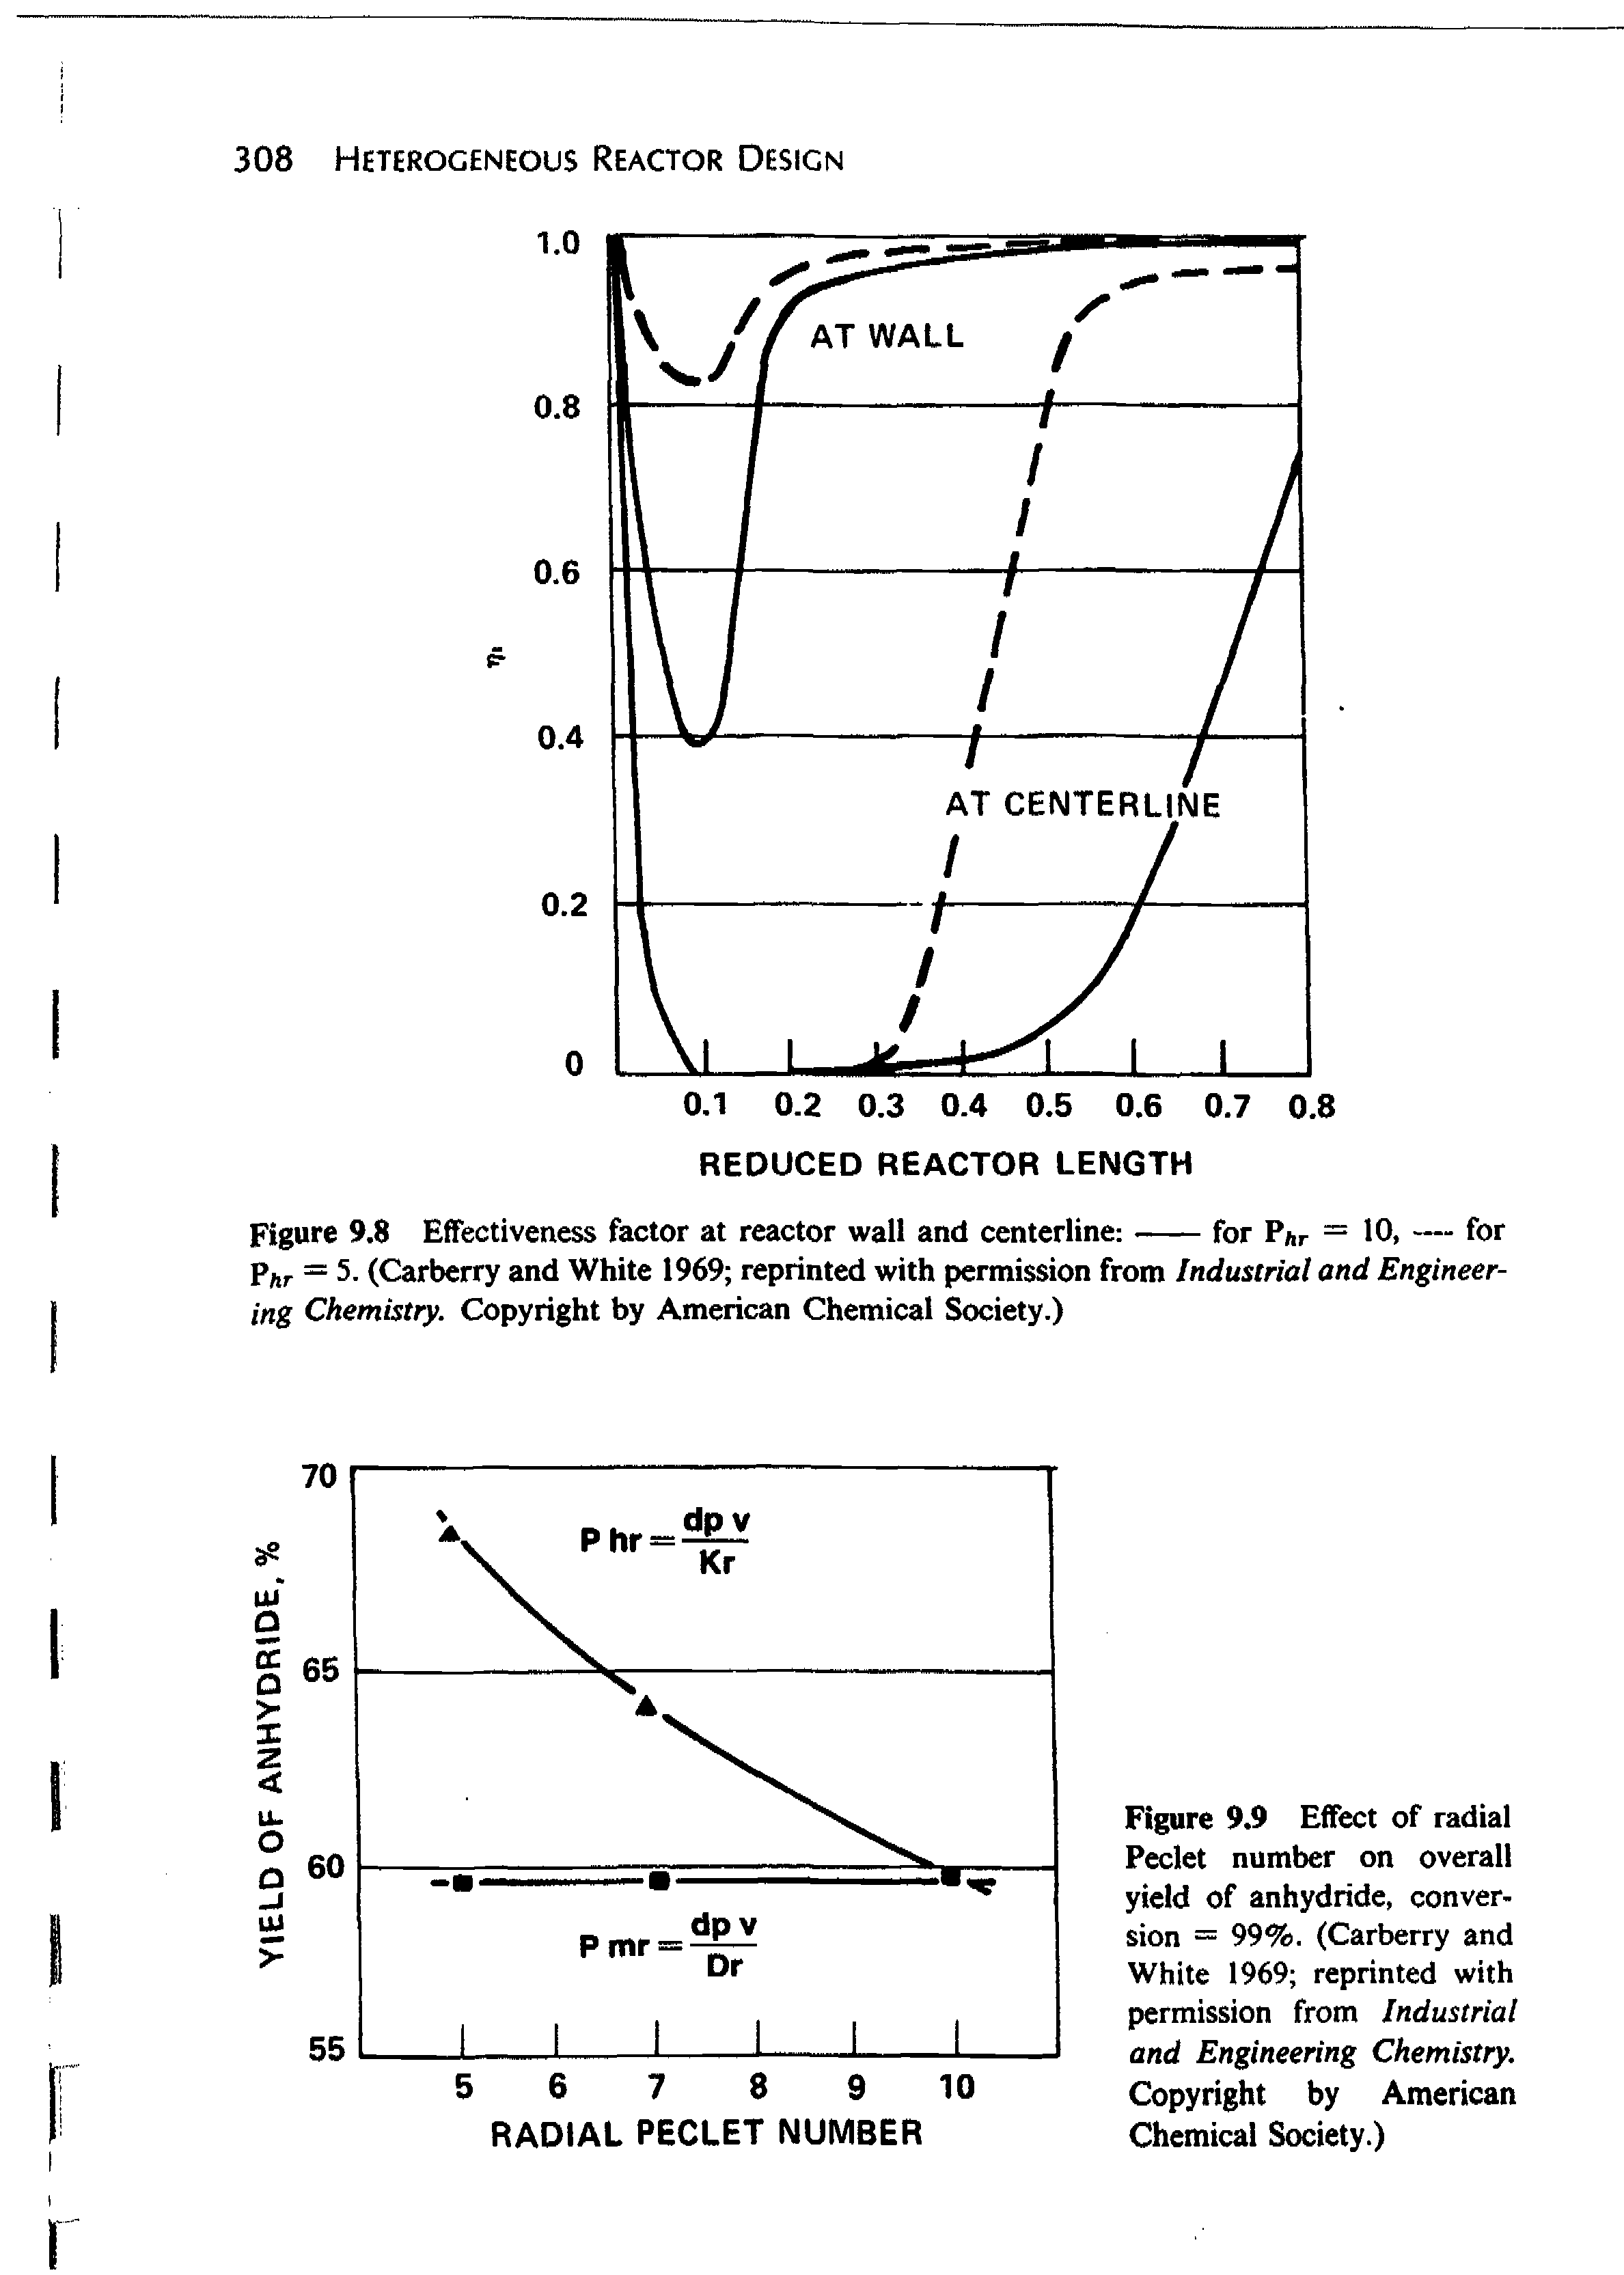 Figure 9.9 Effect of radial Peclet number on overall yield of anhydride, conversion = 99%. (Carberry and White 1969 reprinted with permission from Industrial and Engineering Chemistry. Copyright by American Chemical Society.)...